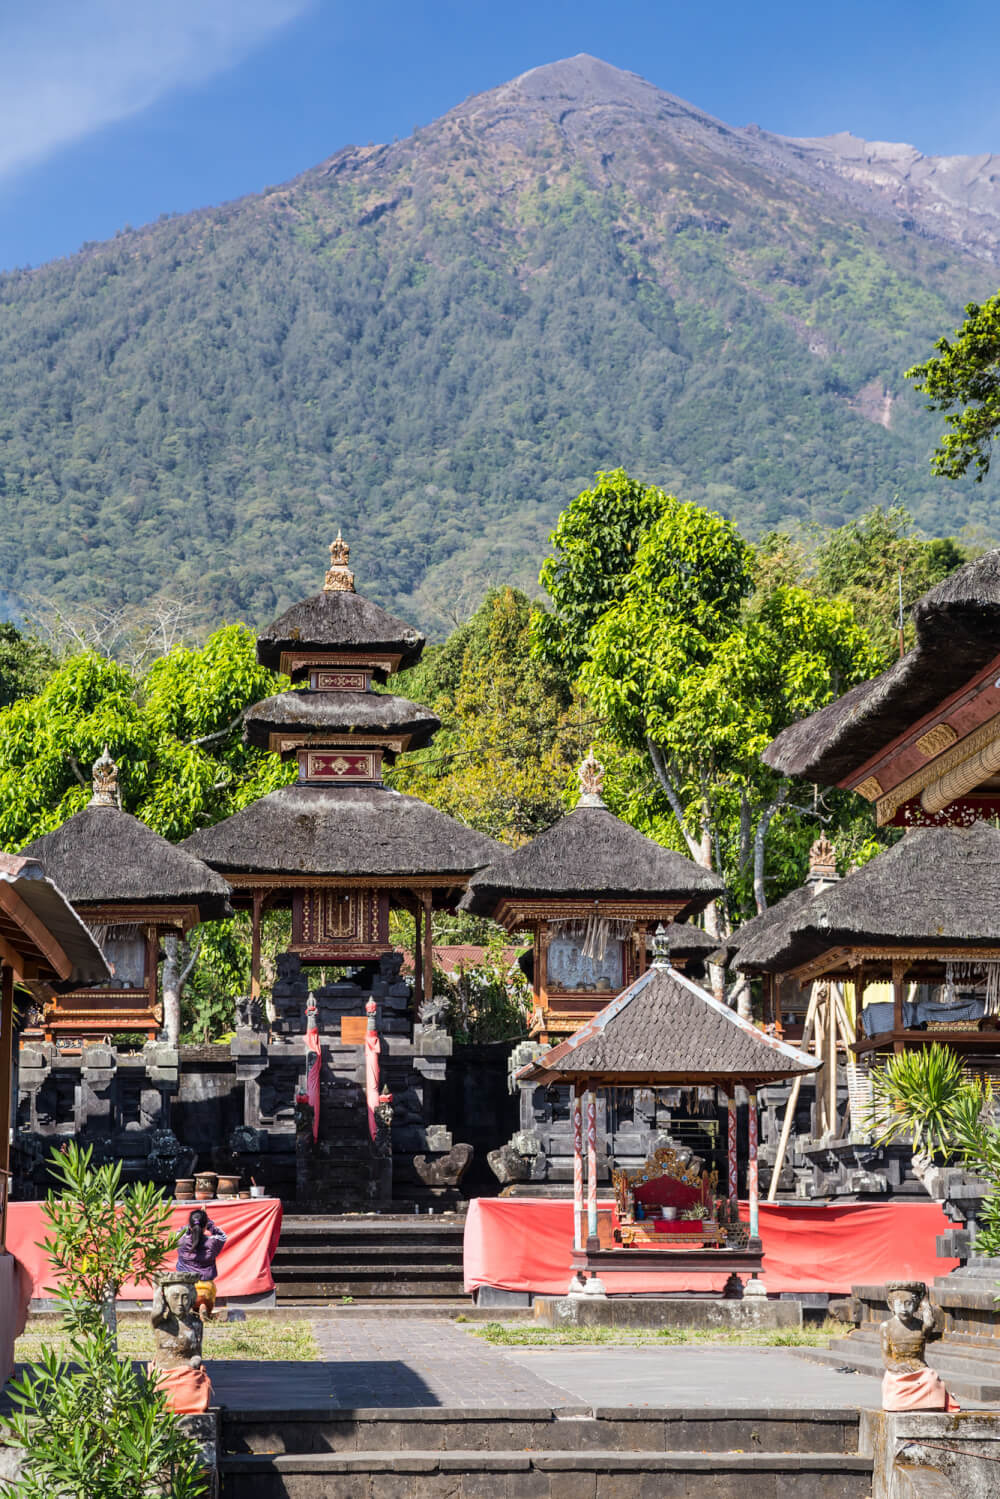 Pura Besakih Balinese temple with Mount Agung in the background